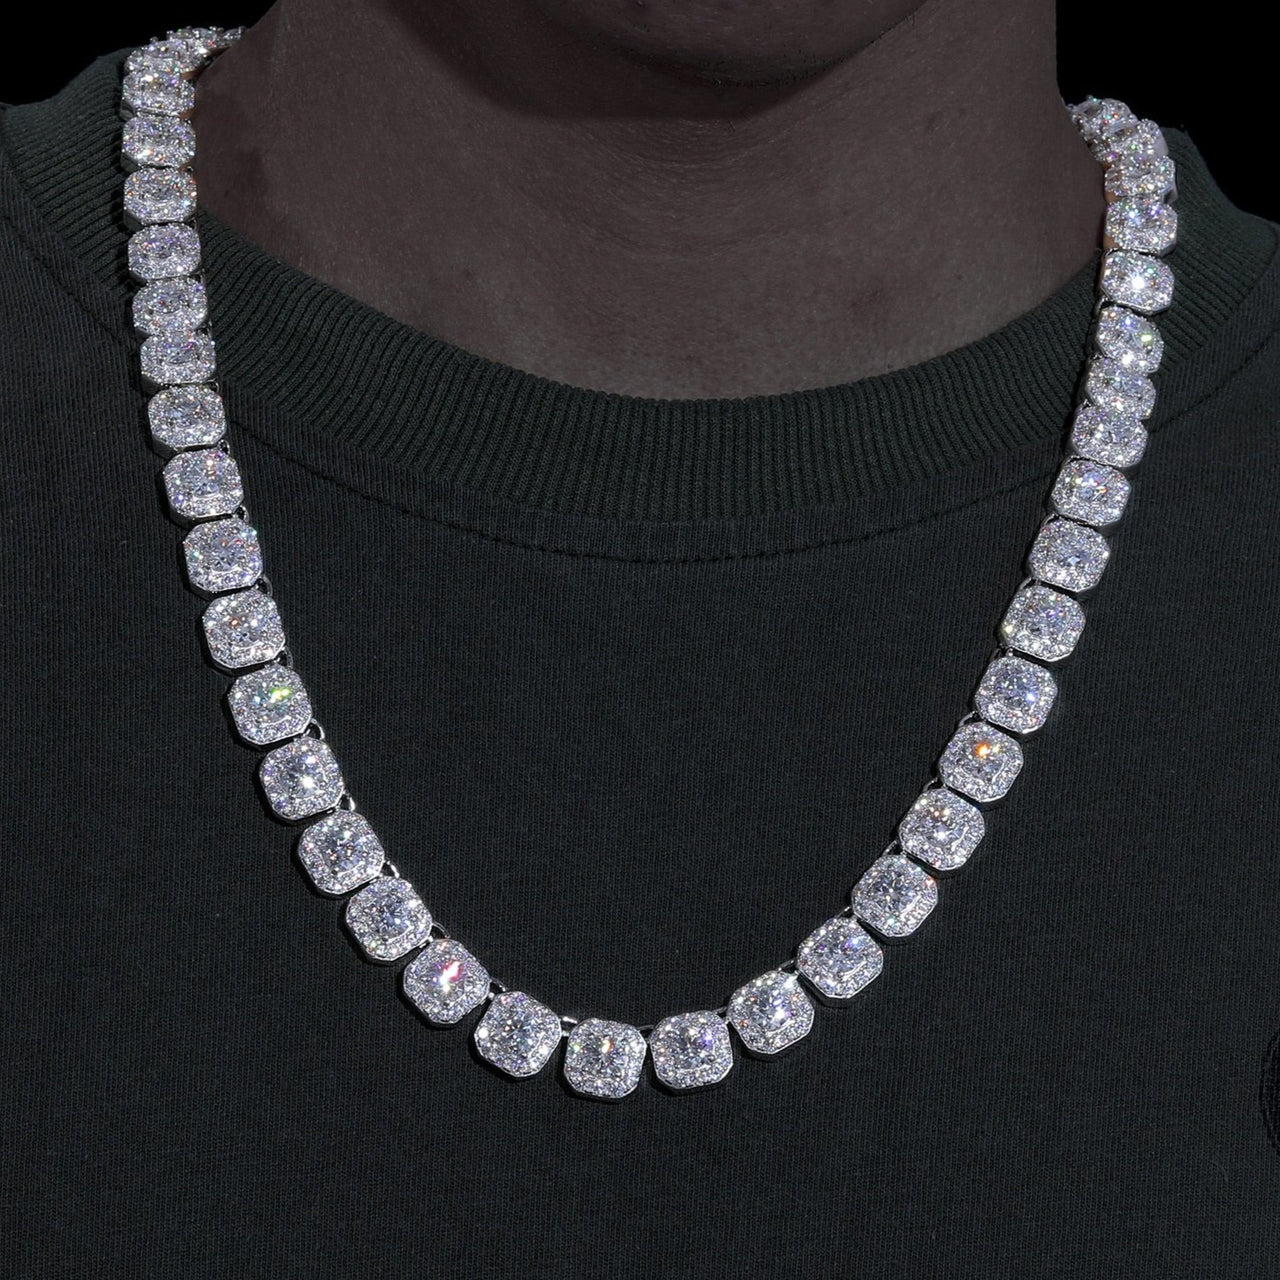 10mm S925 Moissanite Clustered Tennis Chain - Different Drips